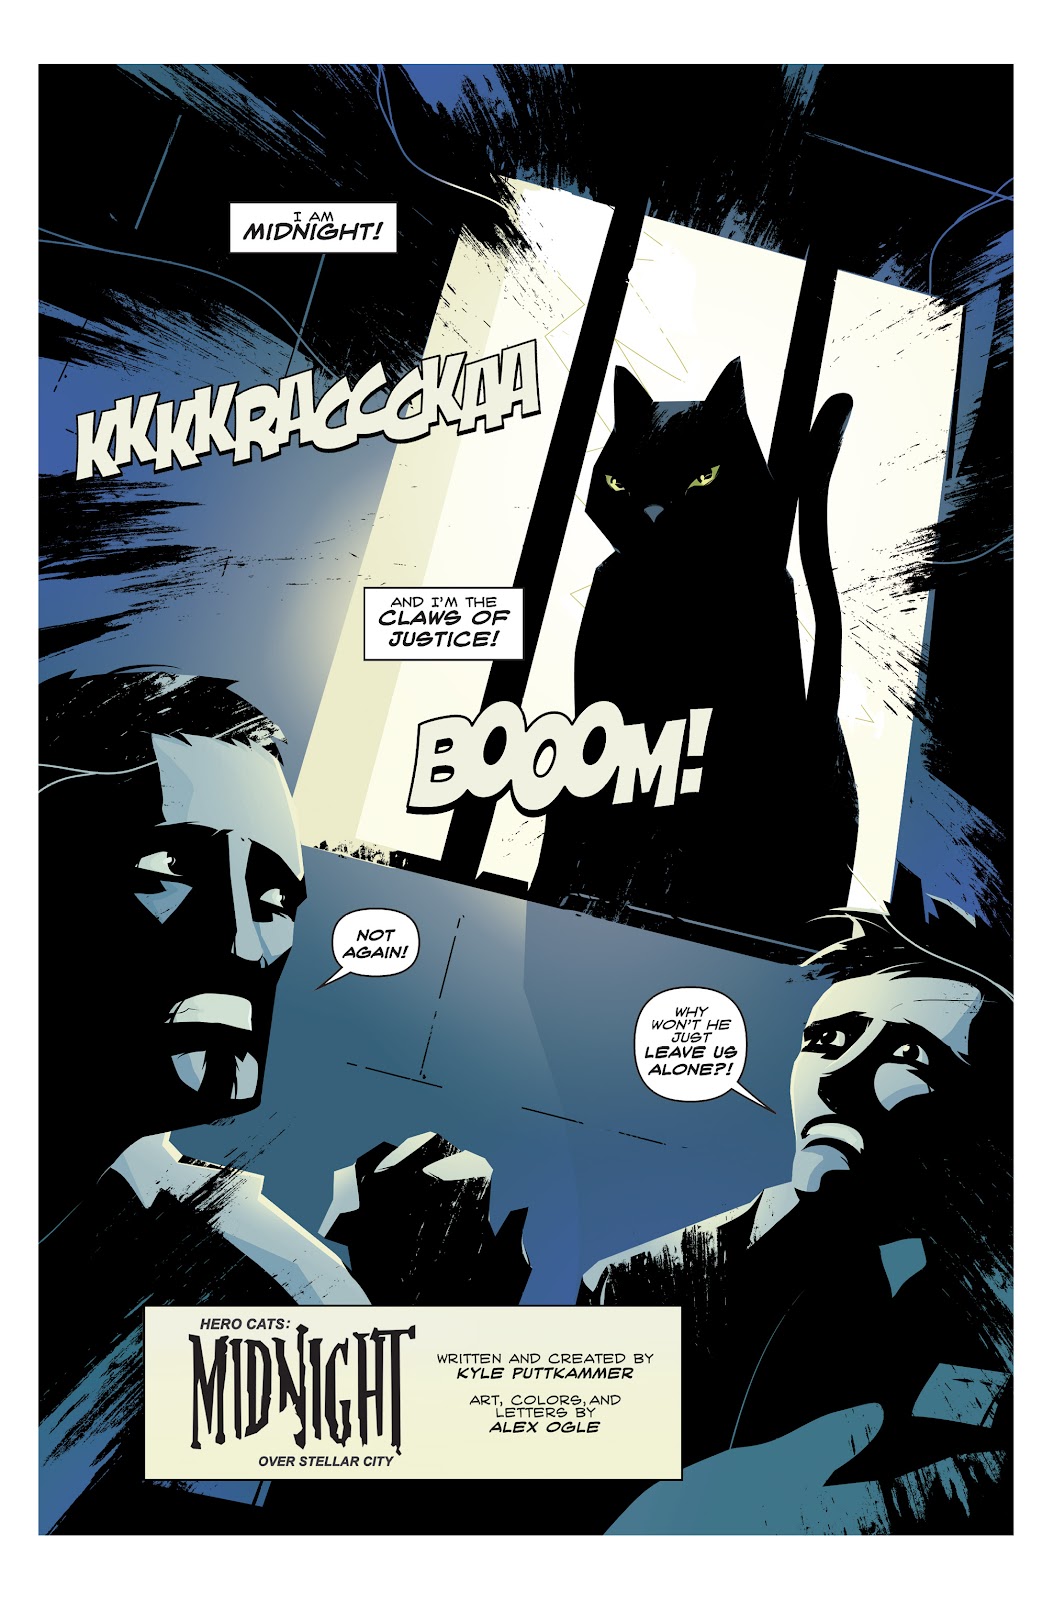 Hero Cats: Midnight Over Stellar City Vol. 2 issue 1 - Page 4